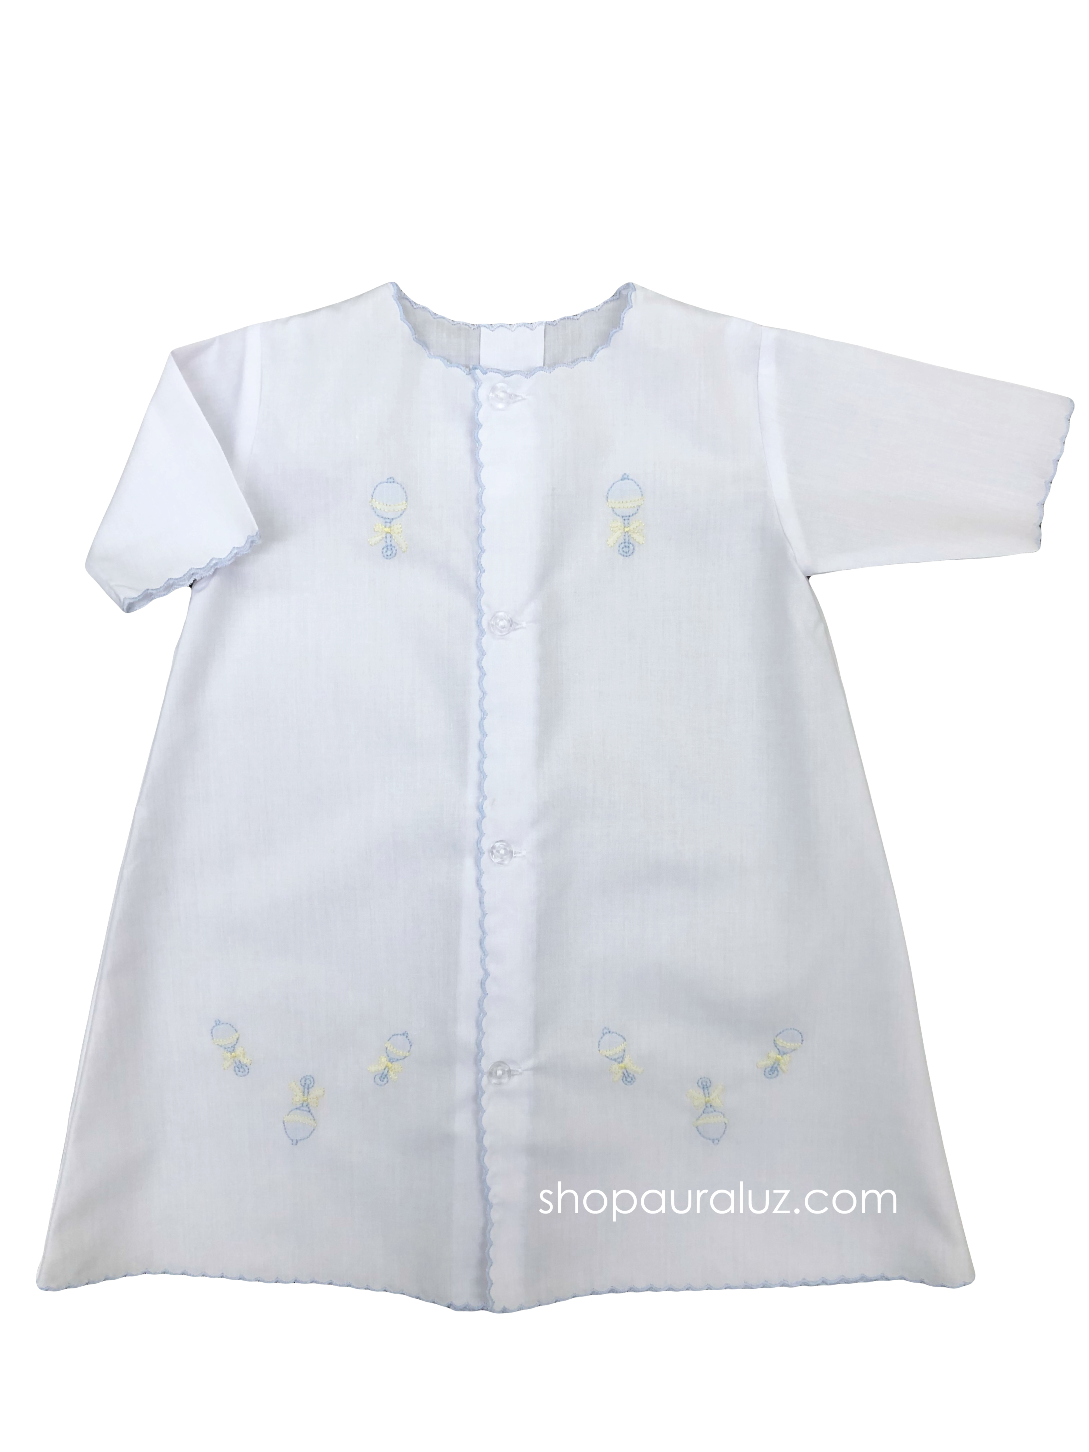 Auraluz Day Gown, l/s..White with blue scallops and embroidered rattles